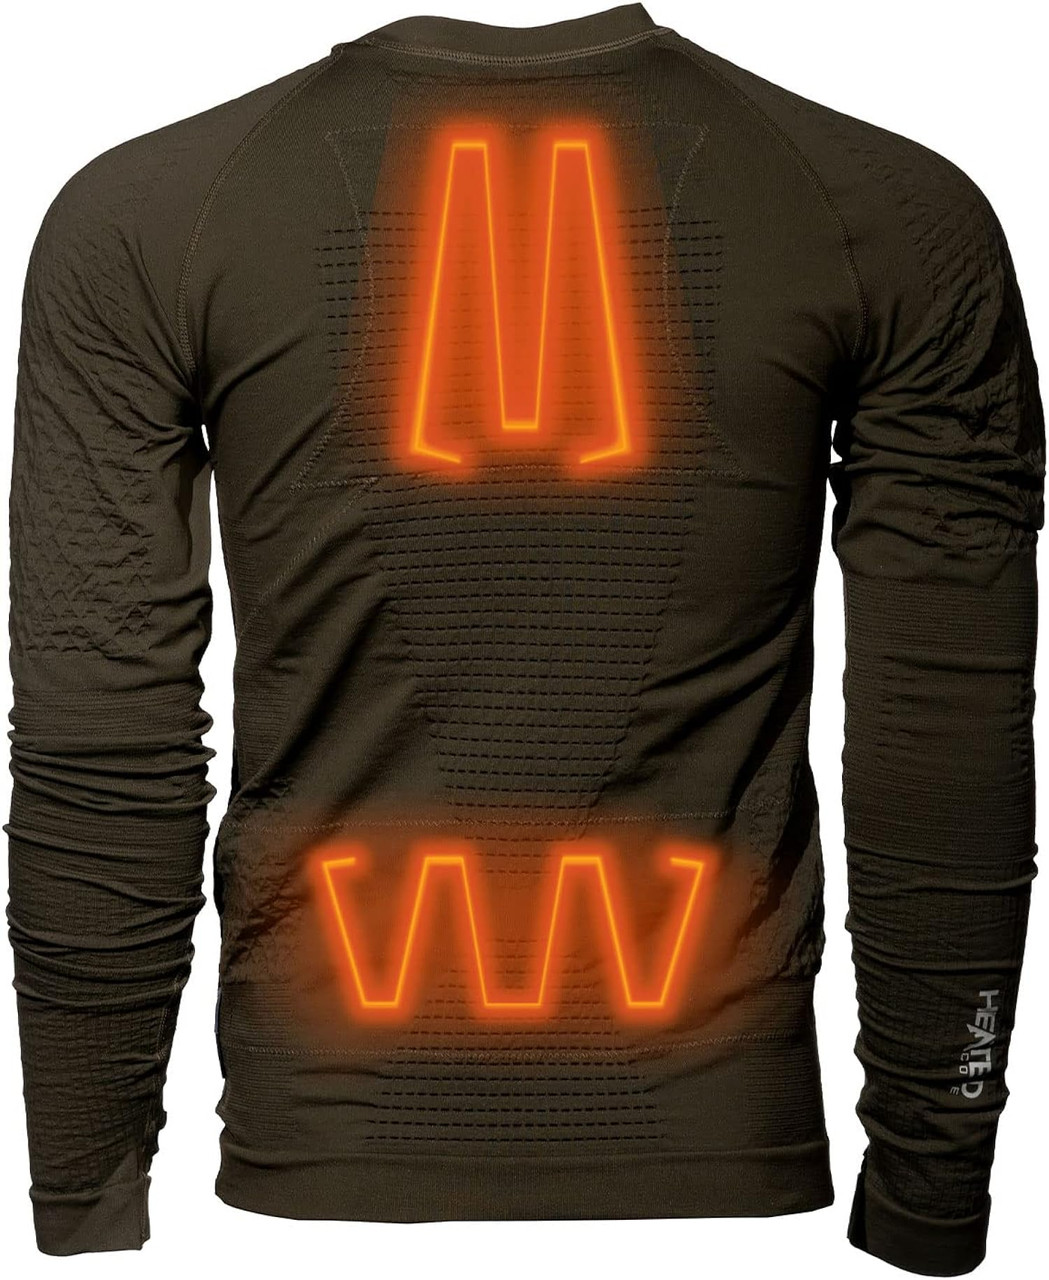 Heated Core ICONX Long Sleeve Shirt W/ Rechargeable Battery- Pine Creek-3XL